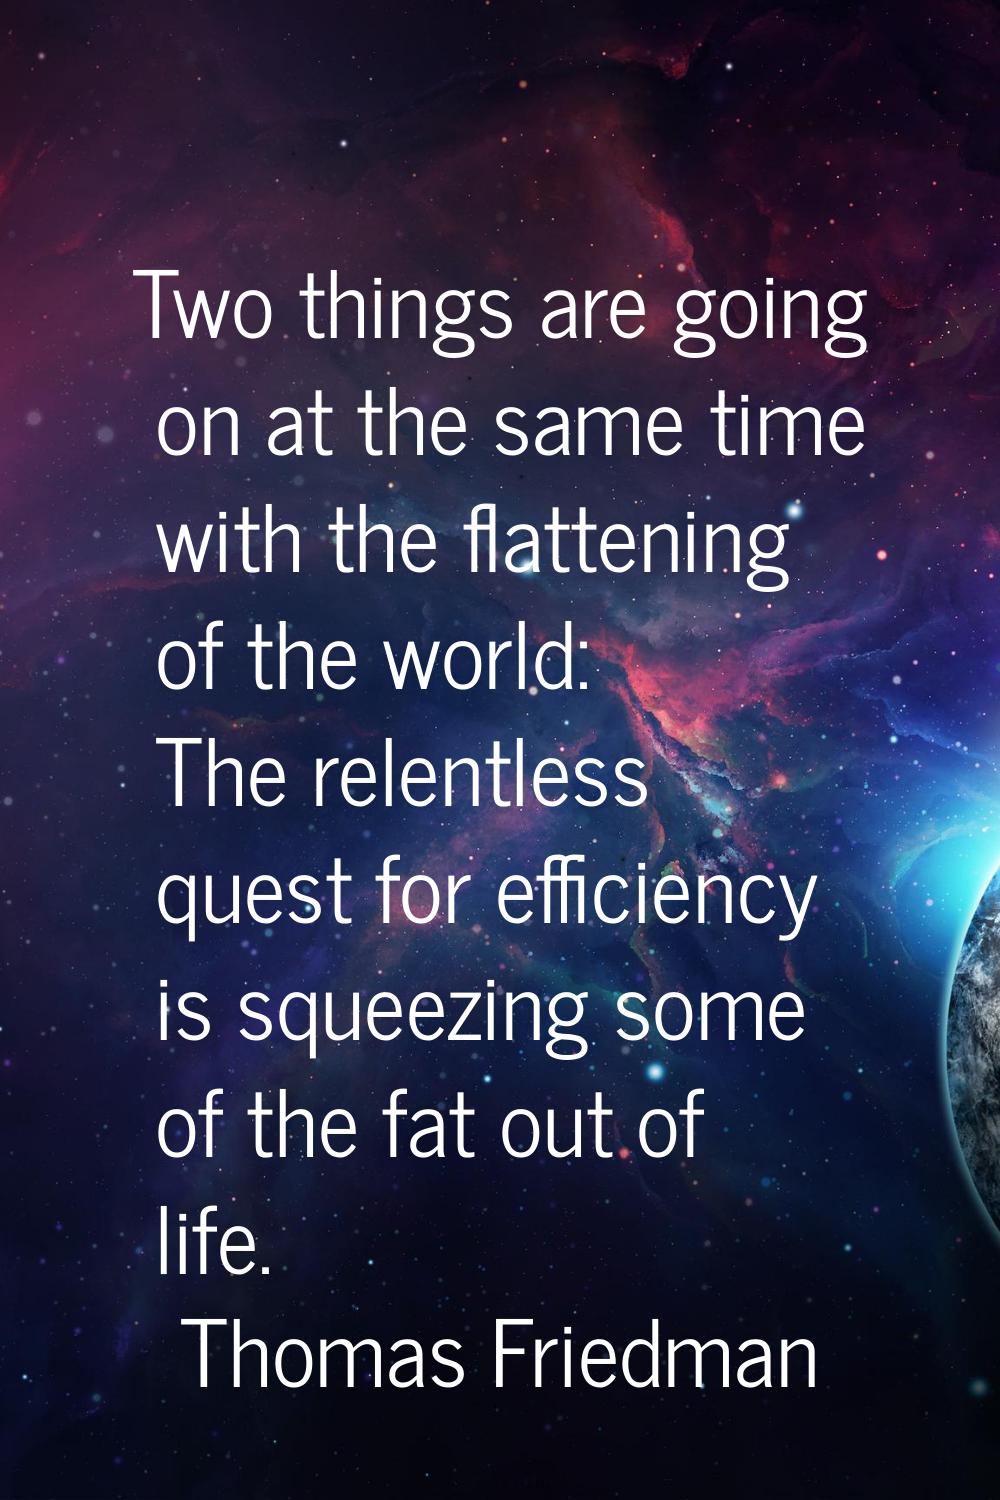 Two things are going on at the same time with the flattening of the world: The relentless quest for